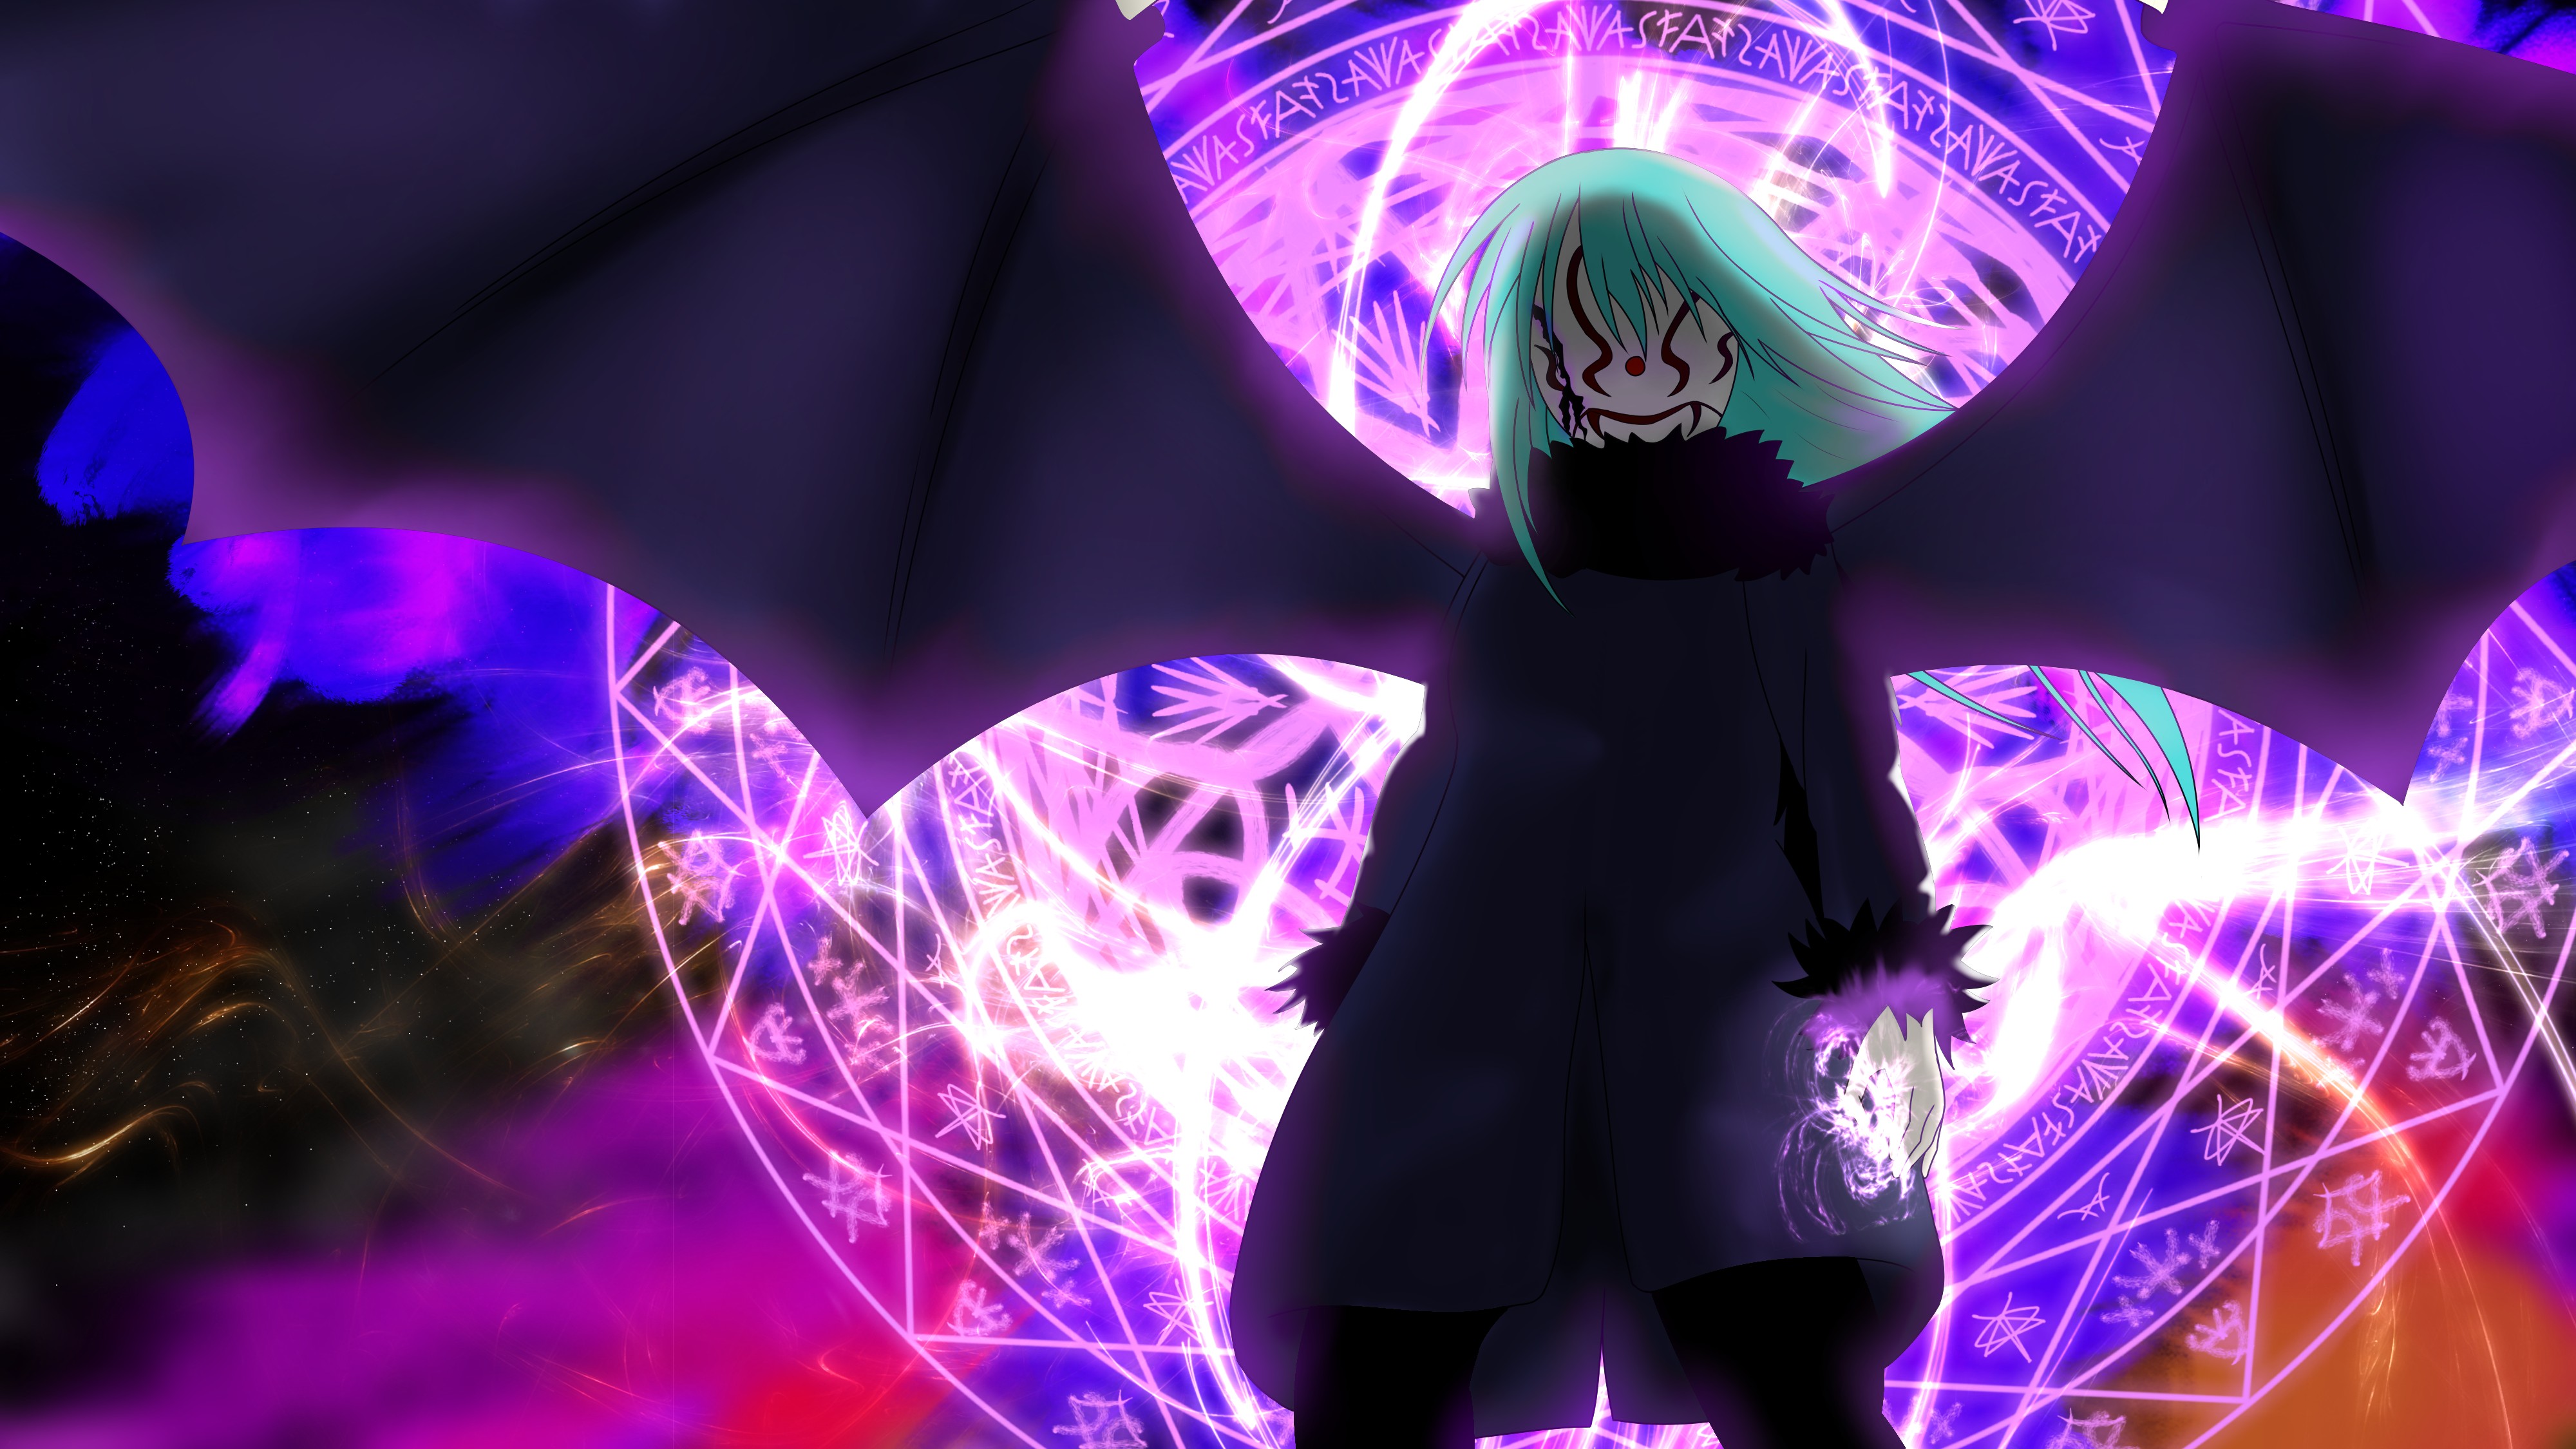 Anime That Time I Got Reincarnated as a Slime HD Wallpaper | Background Image